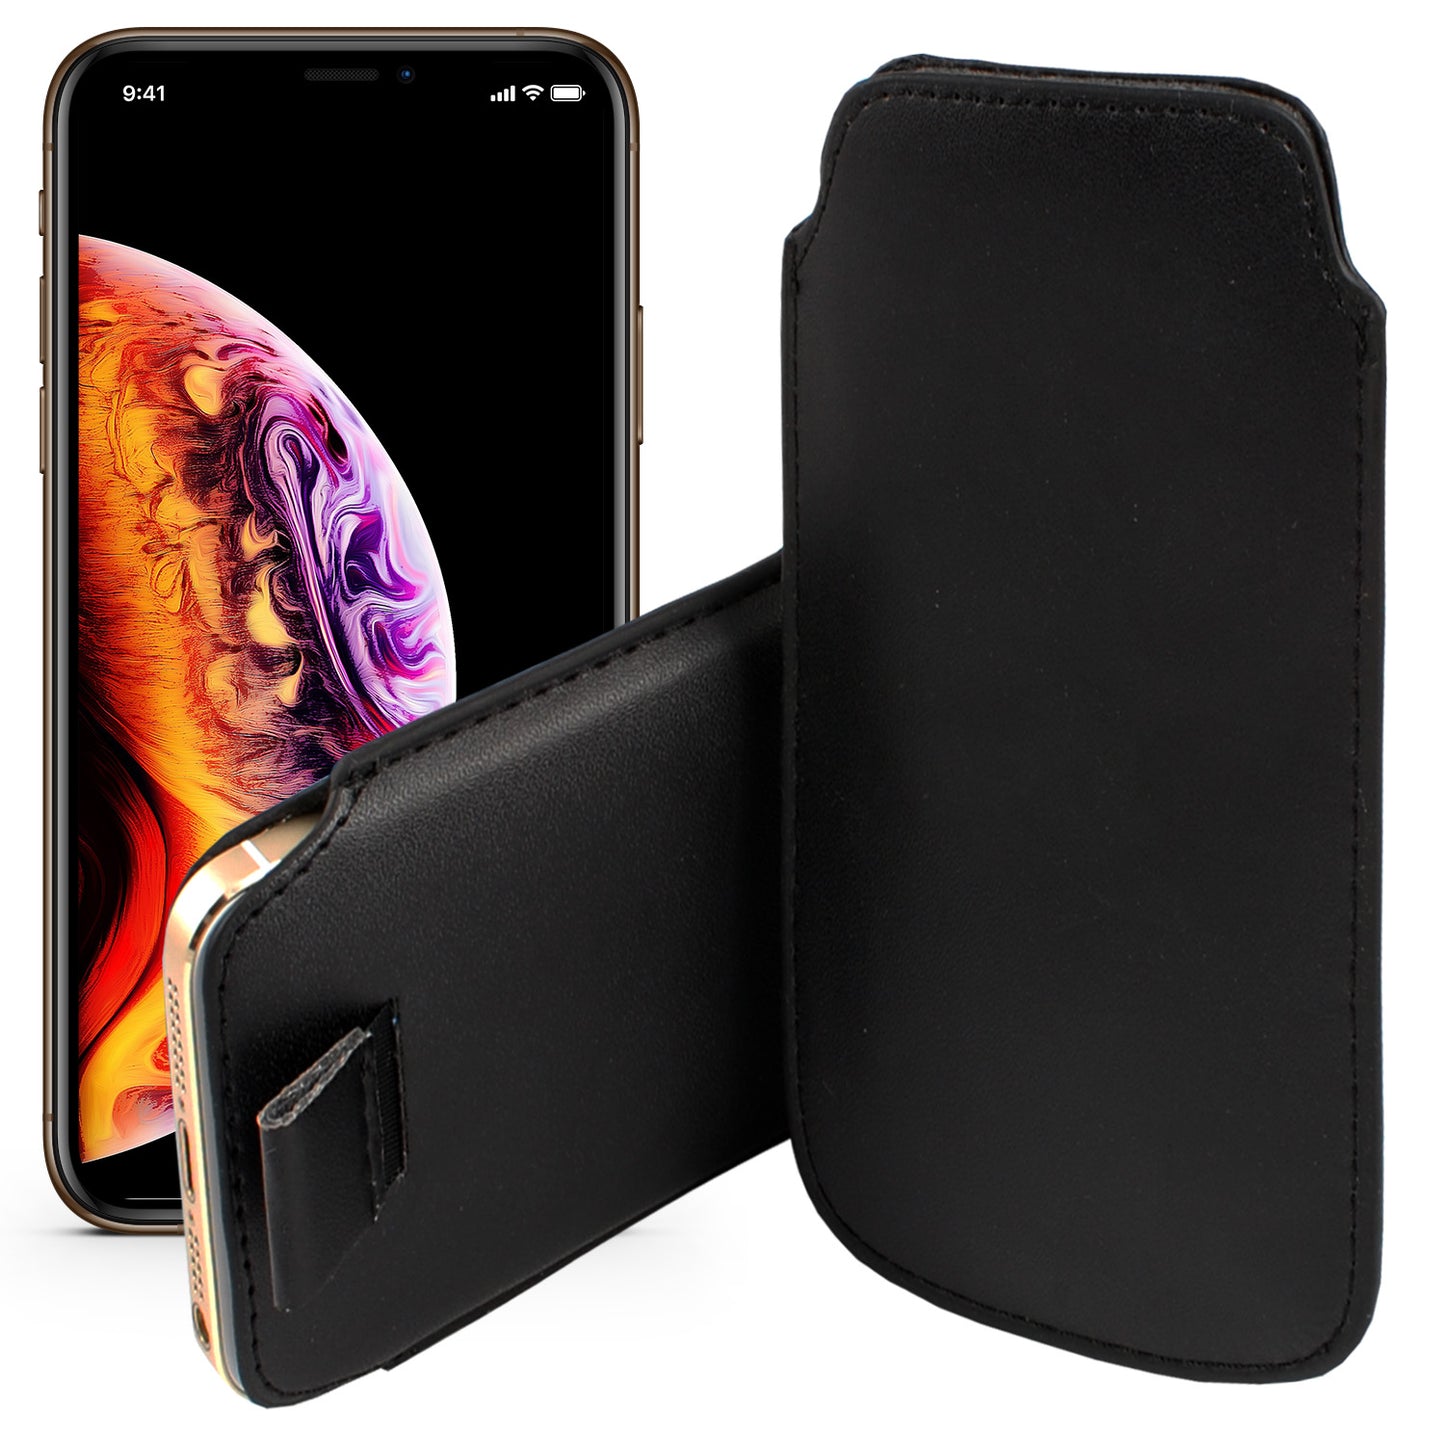 MEZON Apple iPhone 8 (4.7") Black Pull Tab Slim Faux Leather Pouch Sleeve Case Wireless Charging Compatible (iPhone 8, Black)